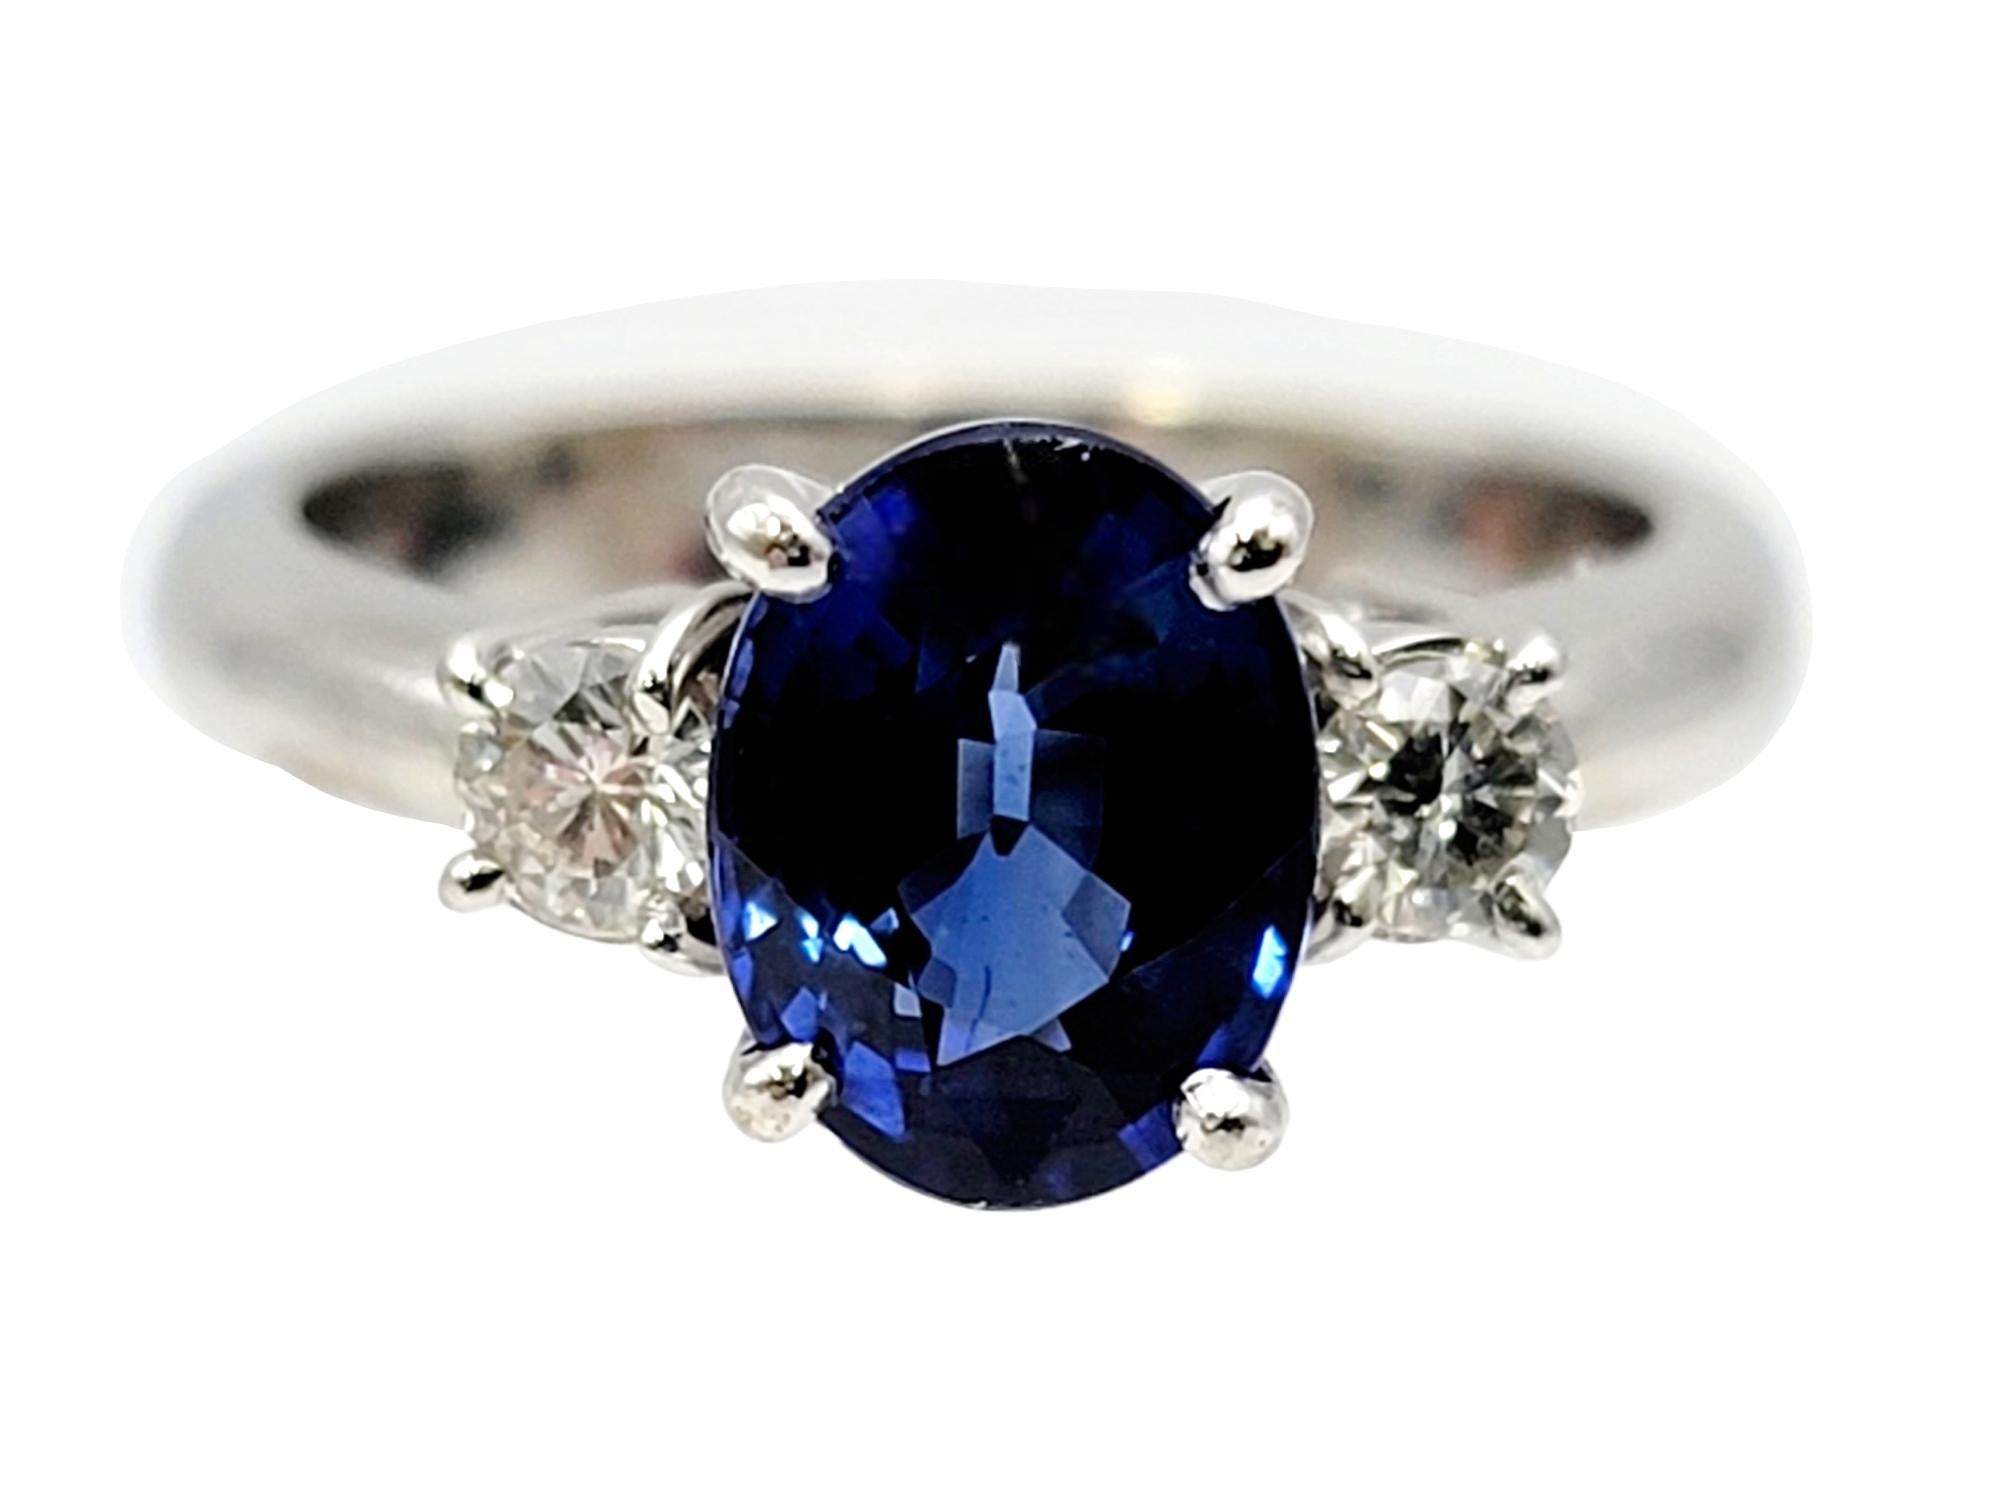 Ring size: 5.25

Gorgeous three stone sapphire and diamond ring. An incredible oval mixed cut natural sapphire stone is prong set at the center of the piece and flanked by 2 round diamonds. The icy white diamonds set against the bright blue stone